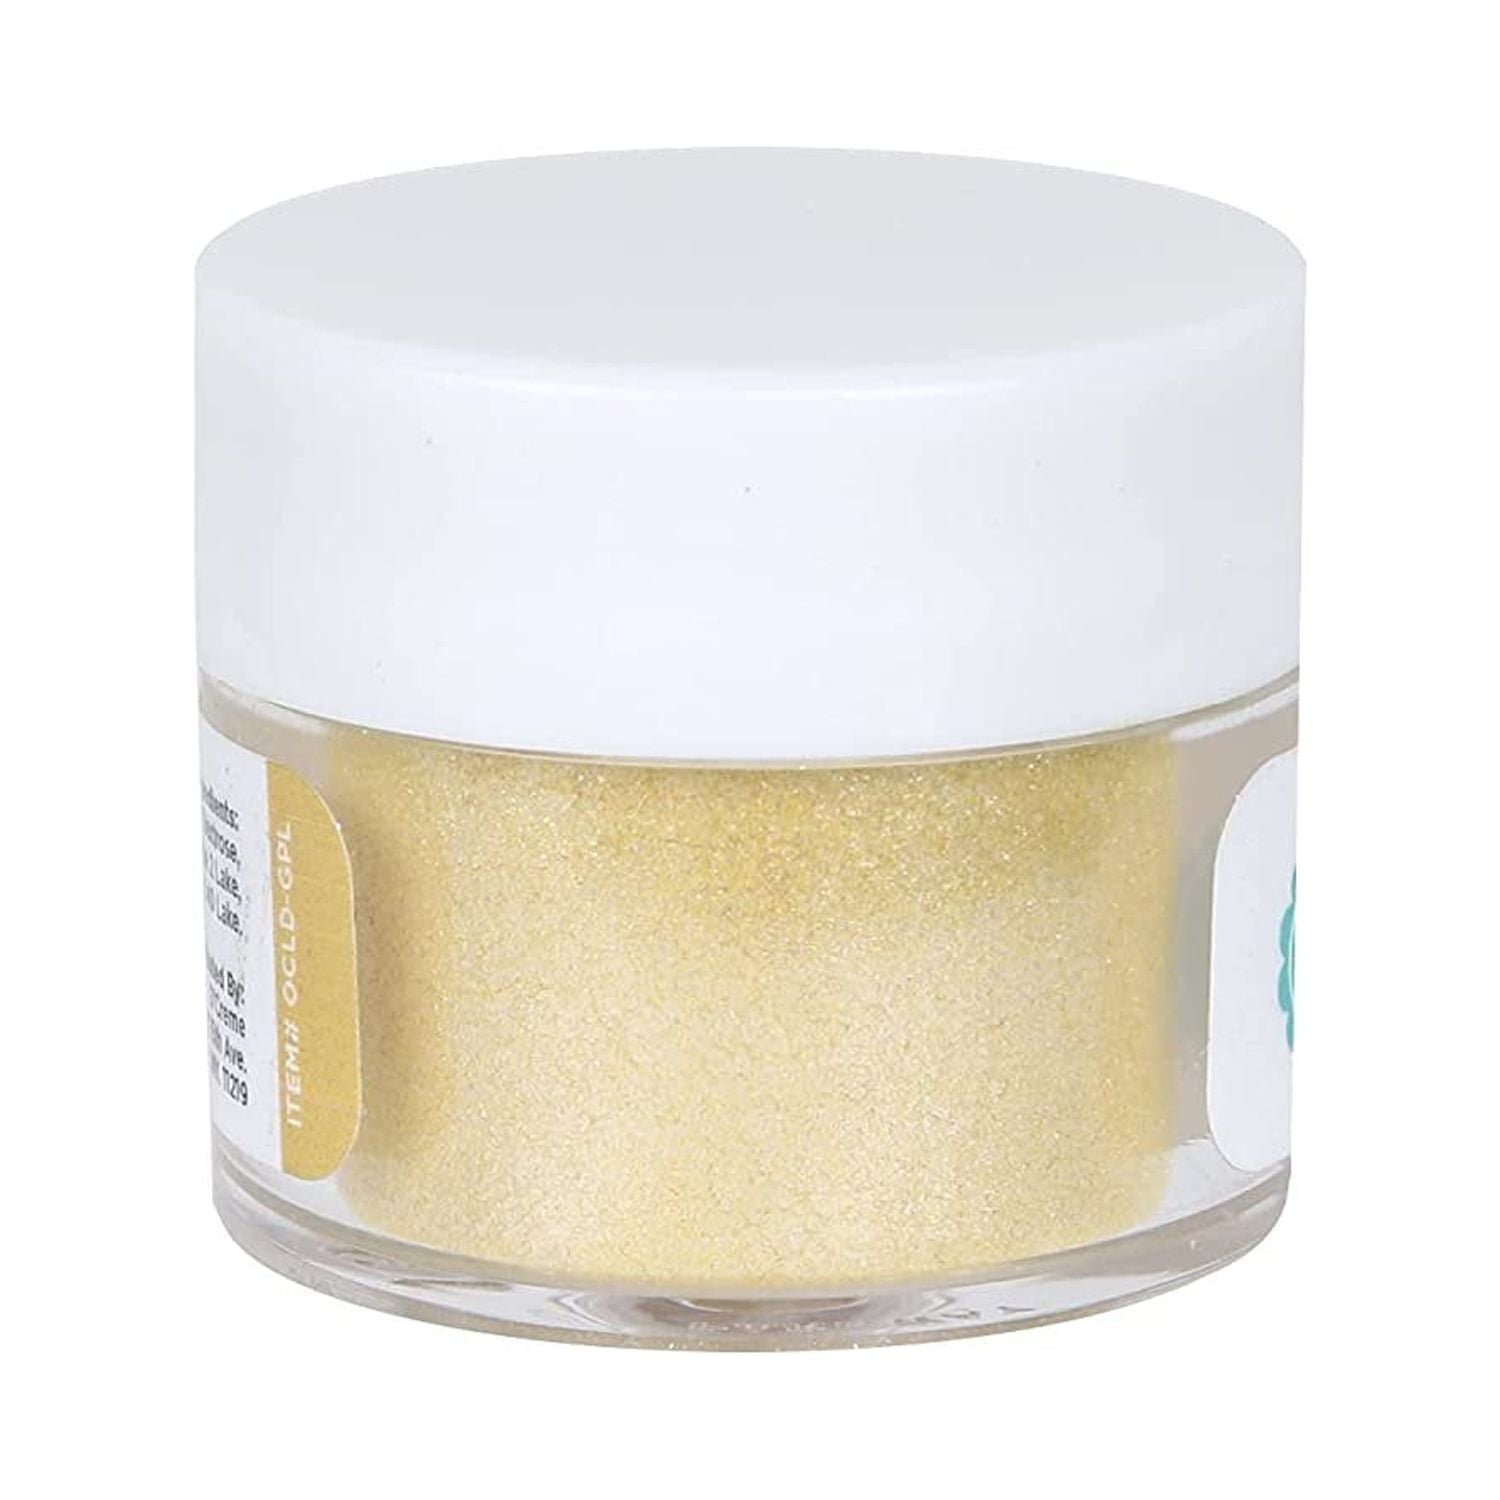 PHARAOH'S GOLD Edible Luxury Cake Dust For Decorating Cakes, Cupcakes, Cake  Pops, & More - Dust on Shine & Luster Food-Grade Coloring, 5 grams, USA